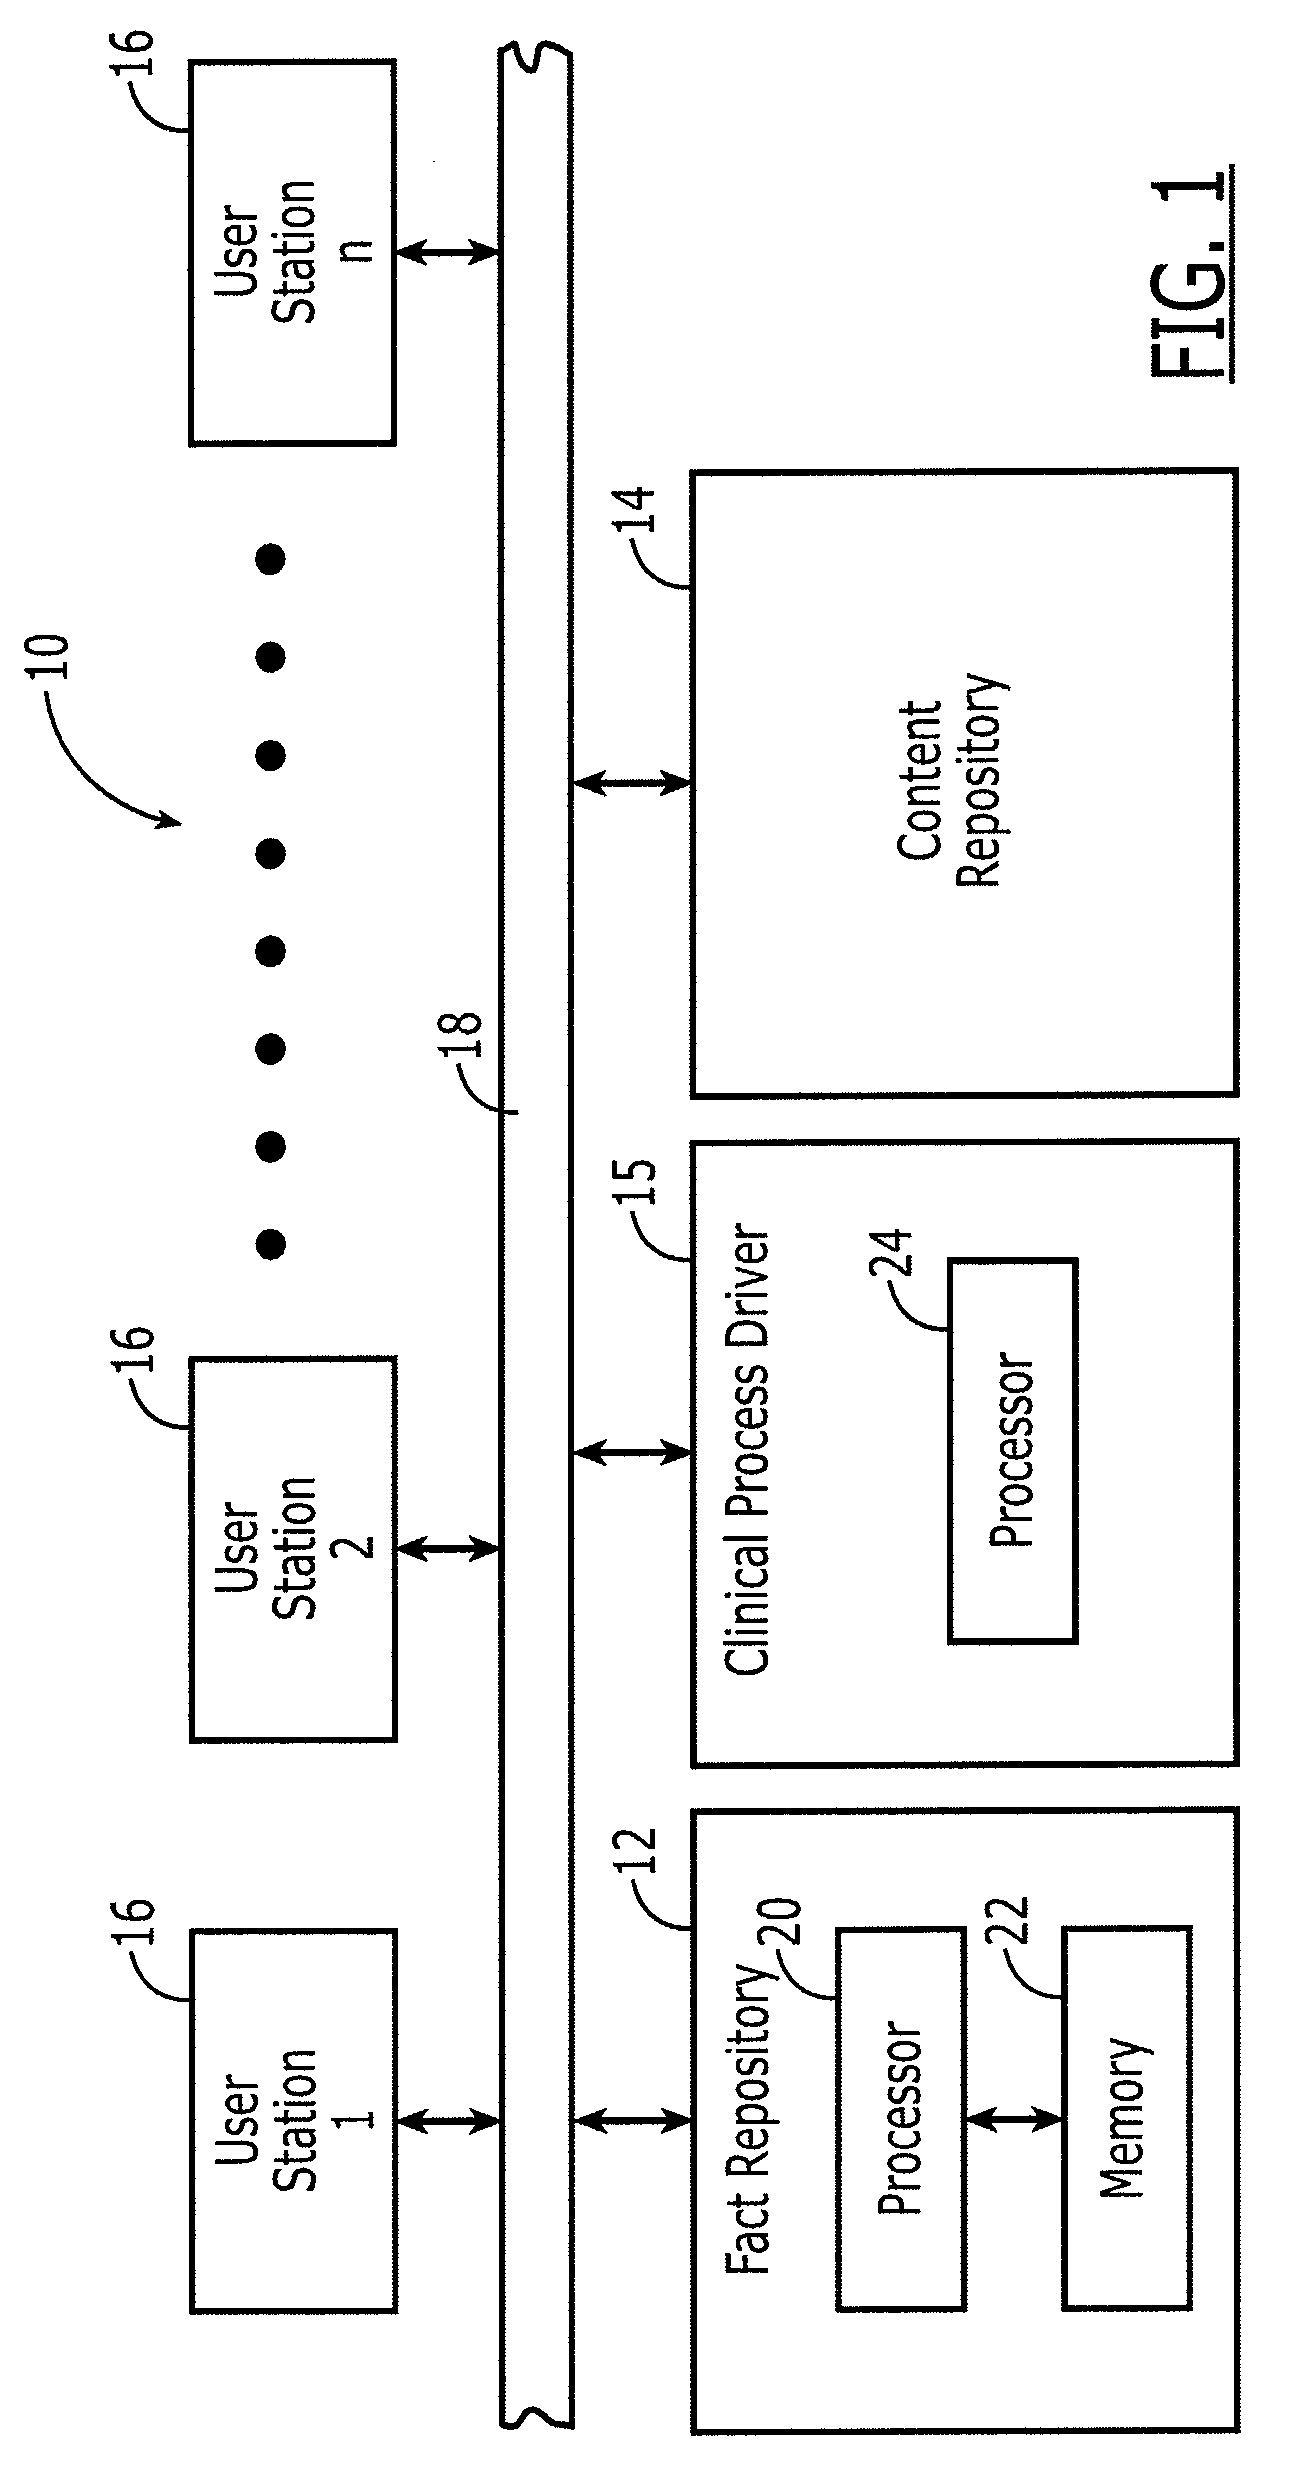 Method, Apparatus And Computer Program Product For Facilitating Patient Progression Toward Discharge